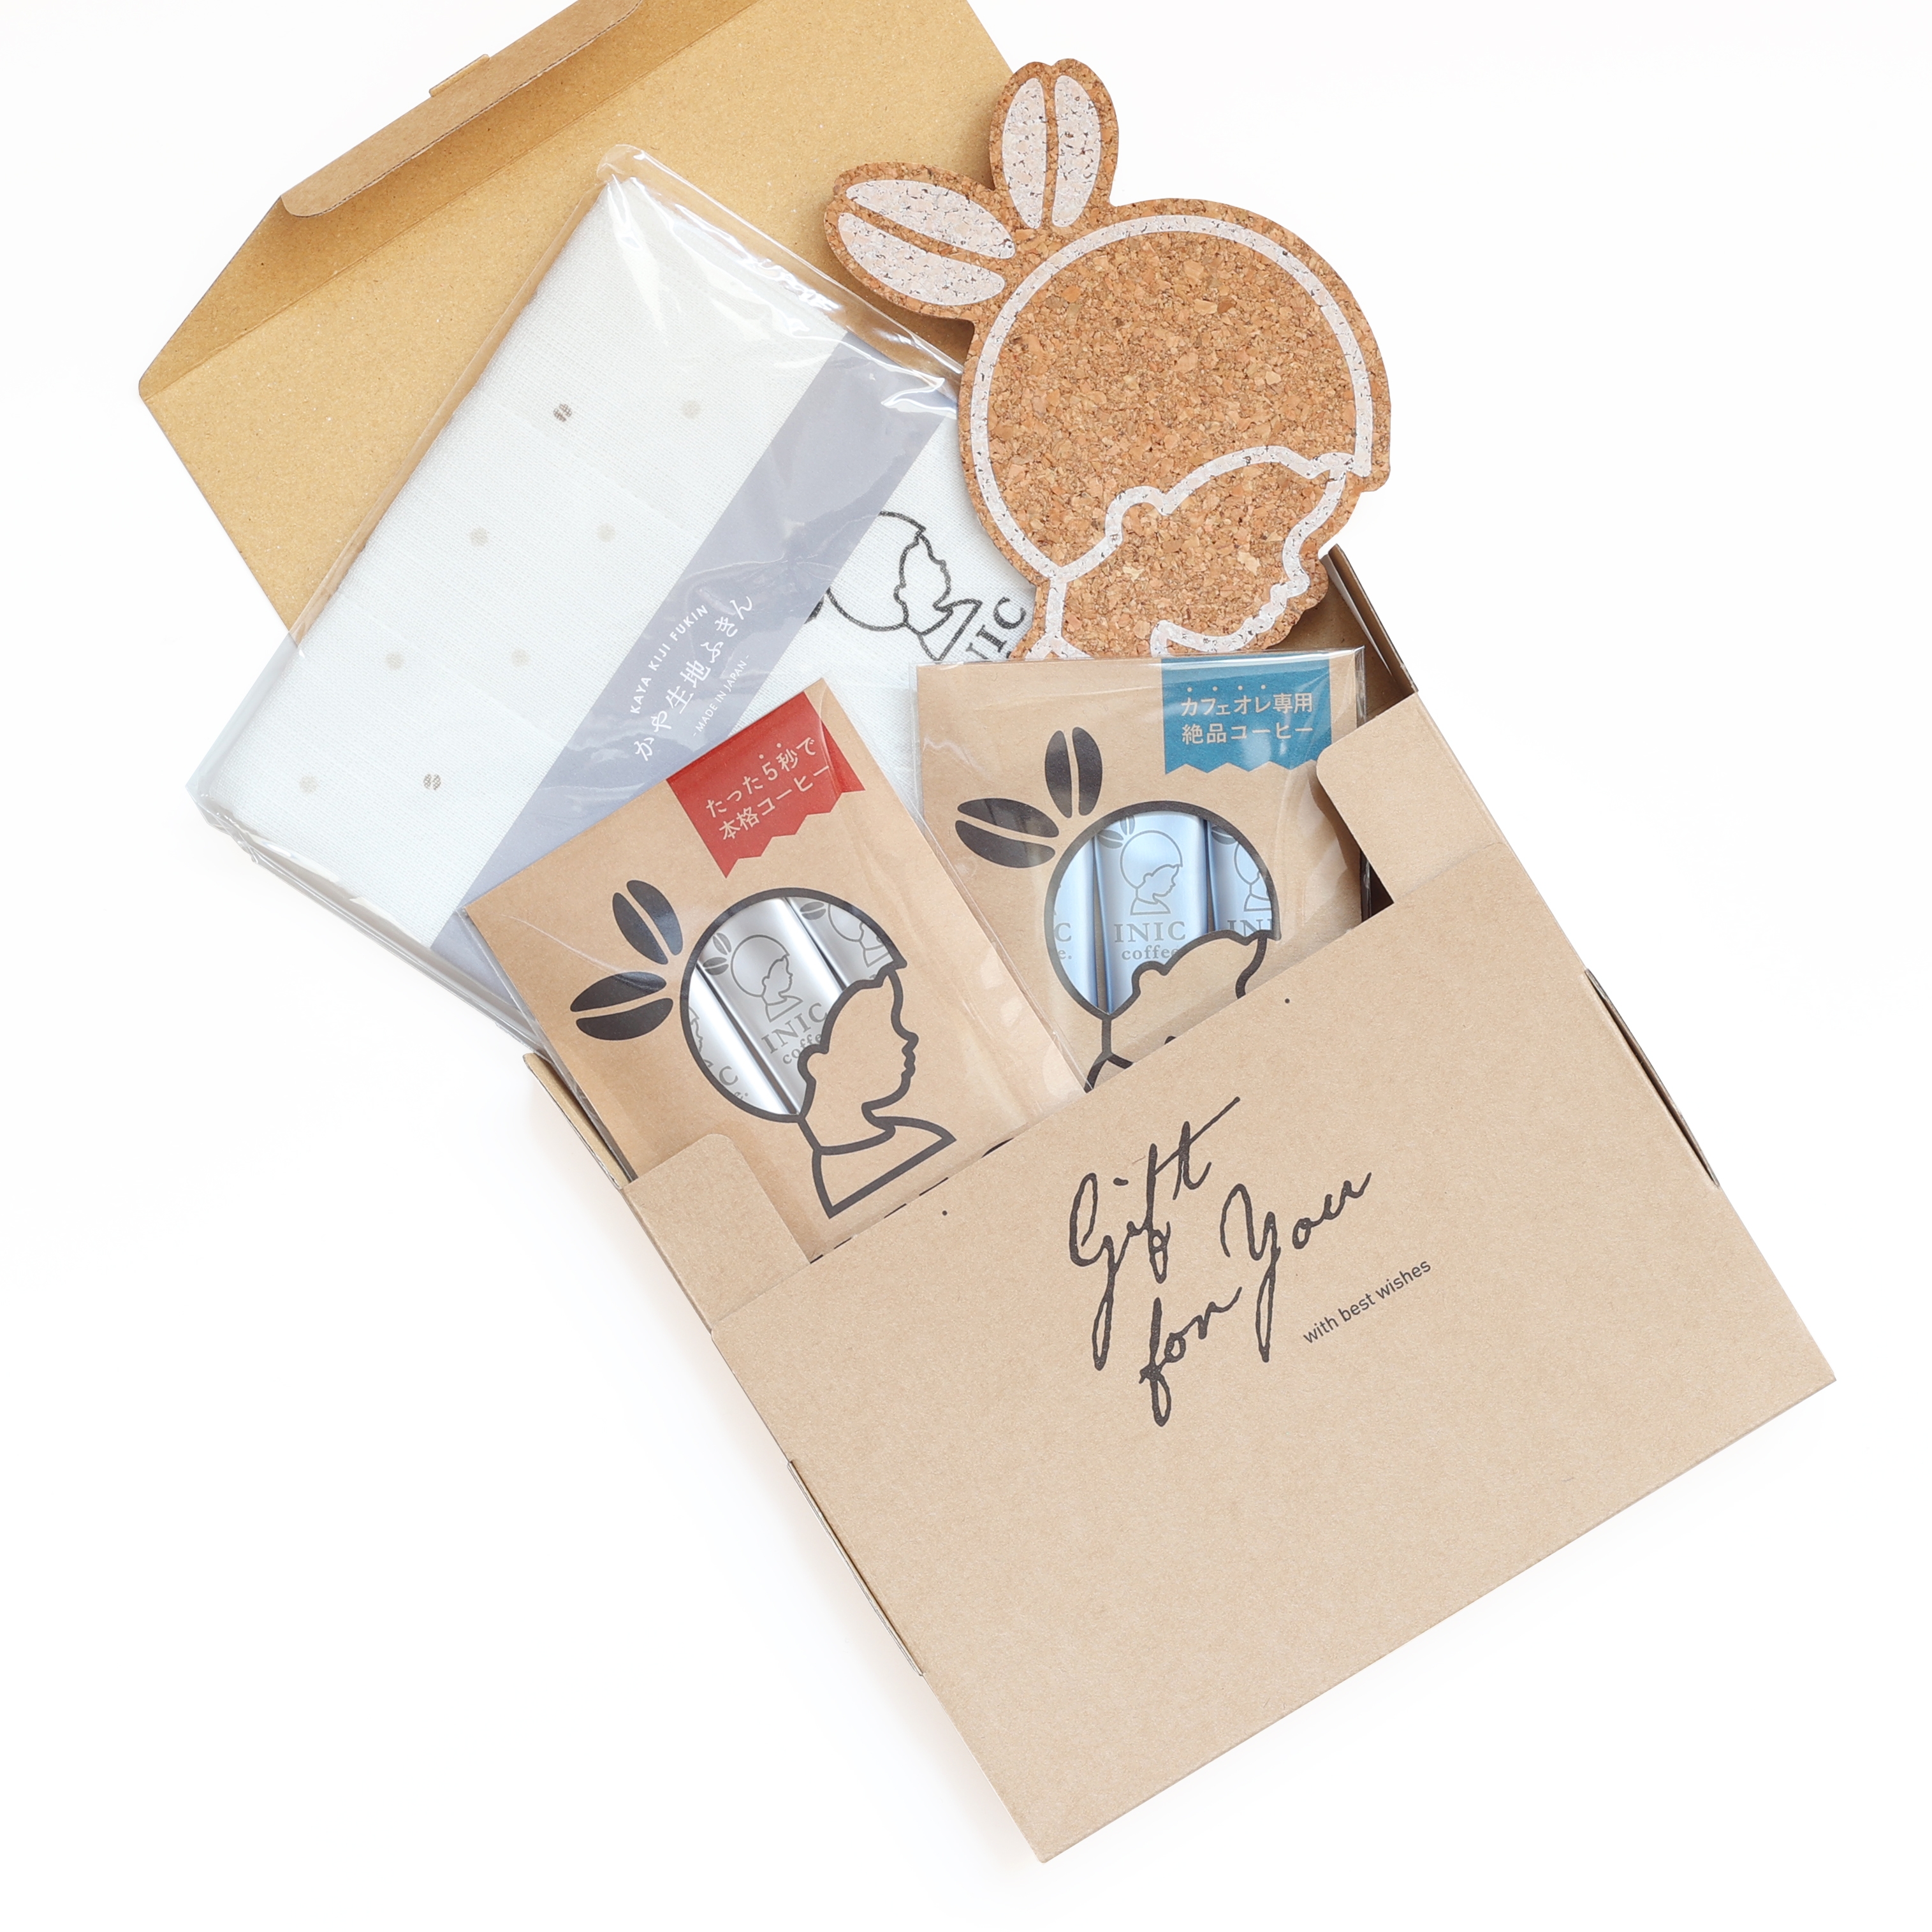 INIC coffee〉サンクスプチギフトセット | Gift Pad